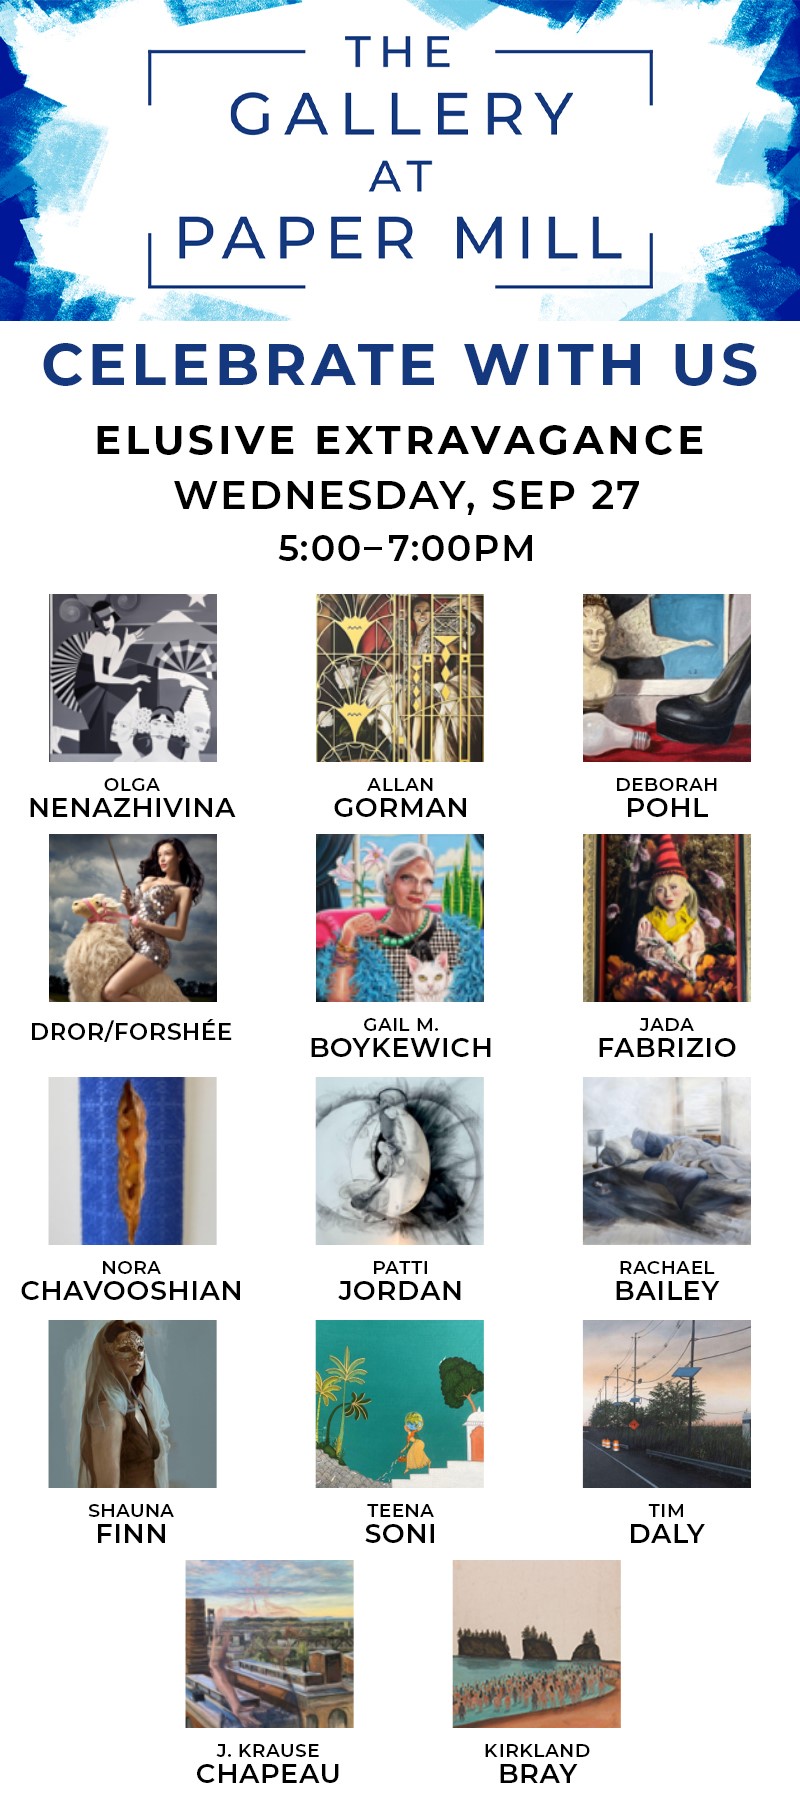 The Gallery at Paper Mill. Celebrate with us. Elusive Extravagance. Wednesday, September 27, 5:00-7:00 PM.